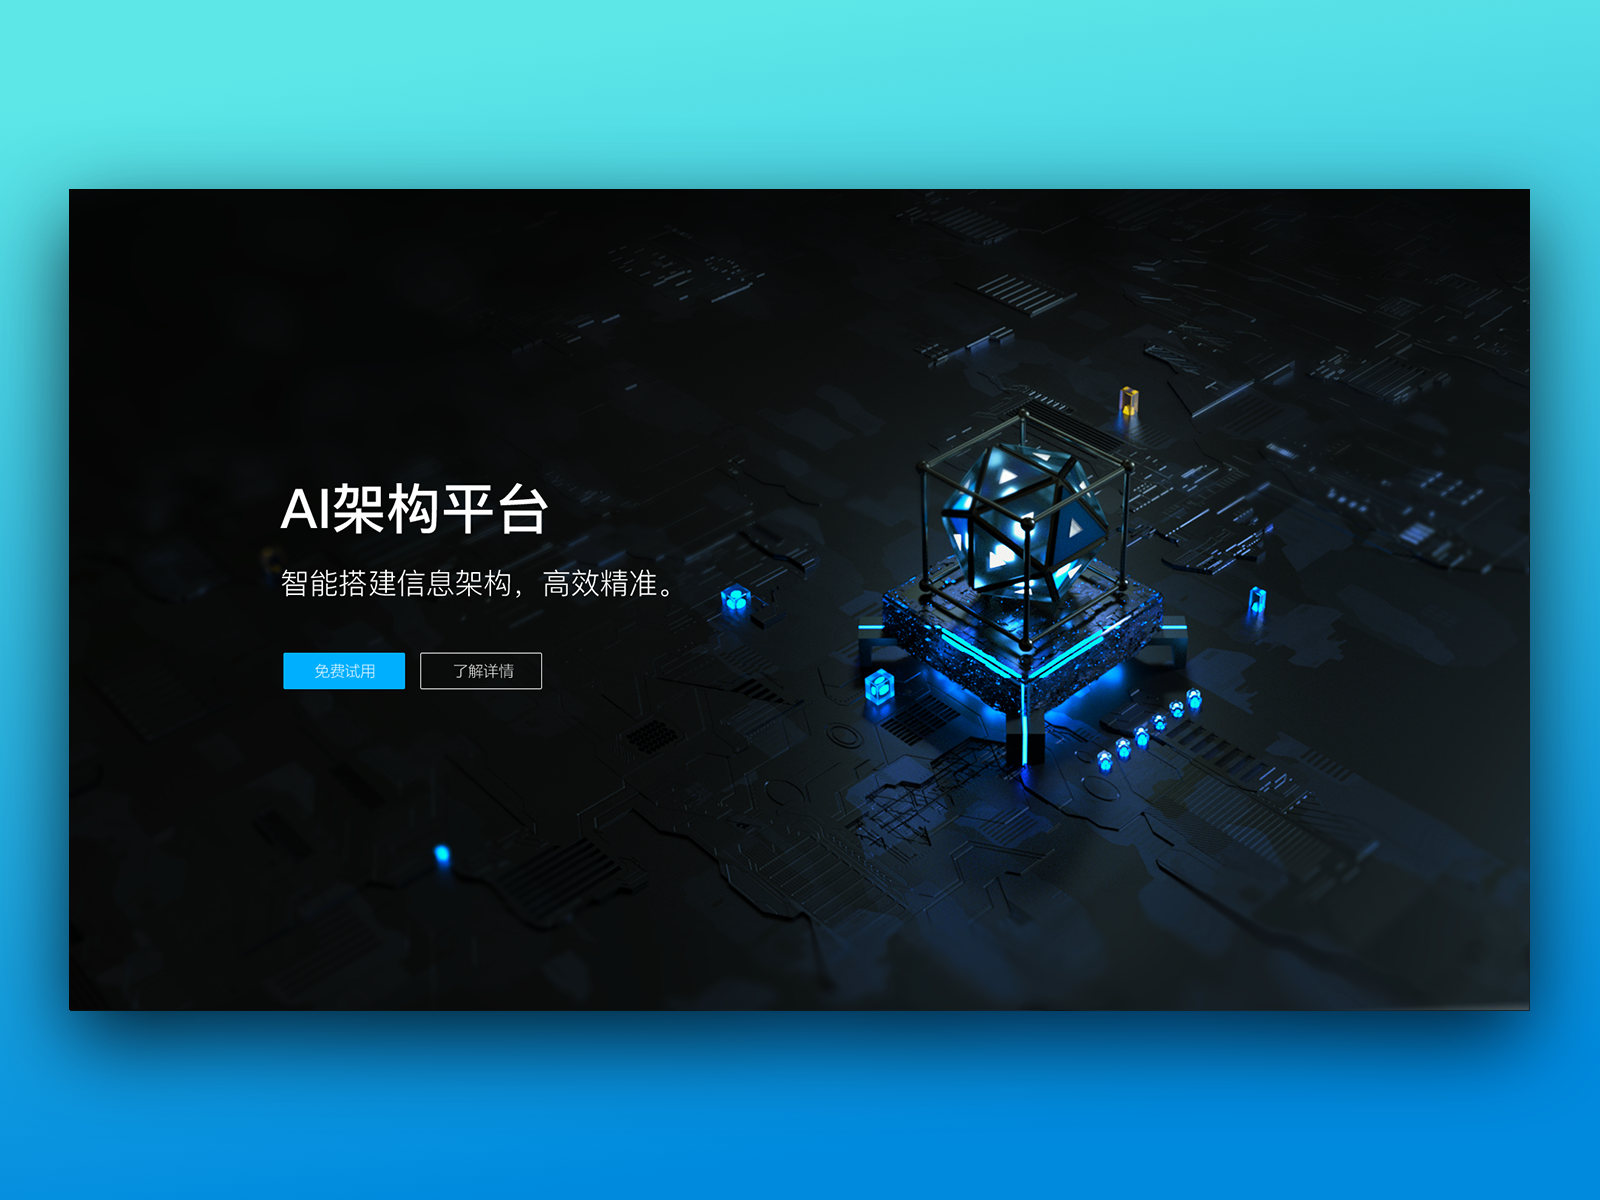 Ai-web banner by Vincen文森 on Dribbble